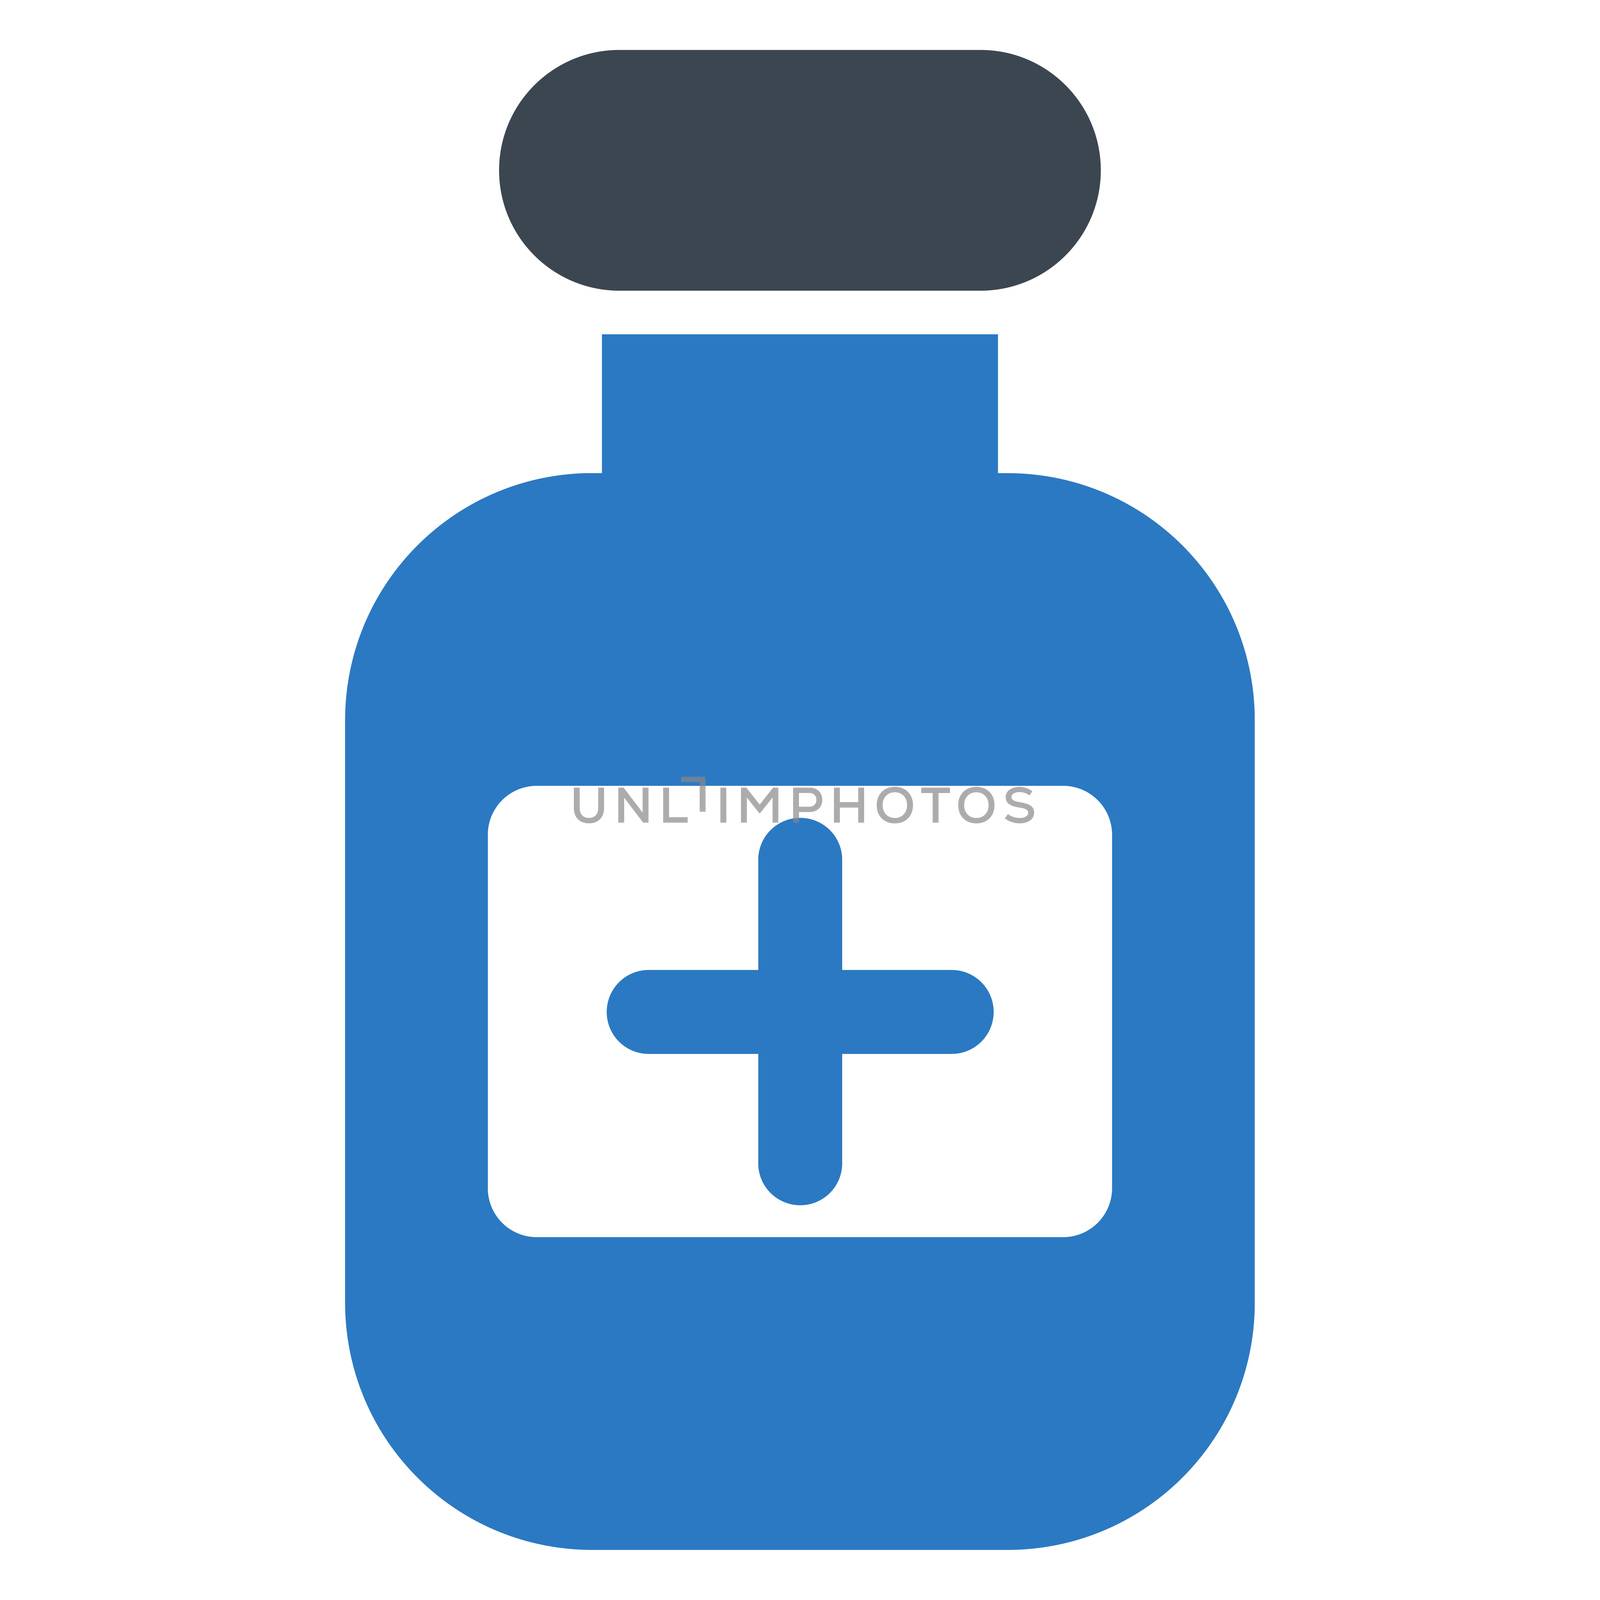 Drugs Bottle raster icon. Style is bicolor flat symbol, smooth blue colors, rounded angles, white background.